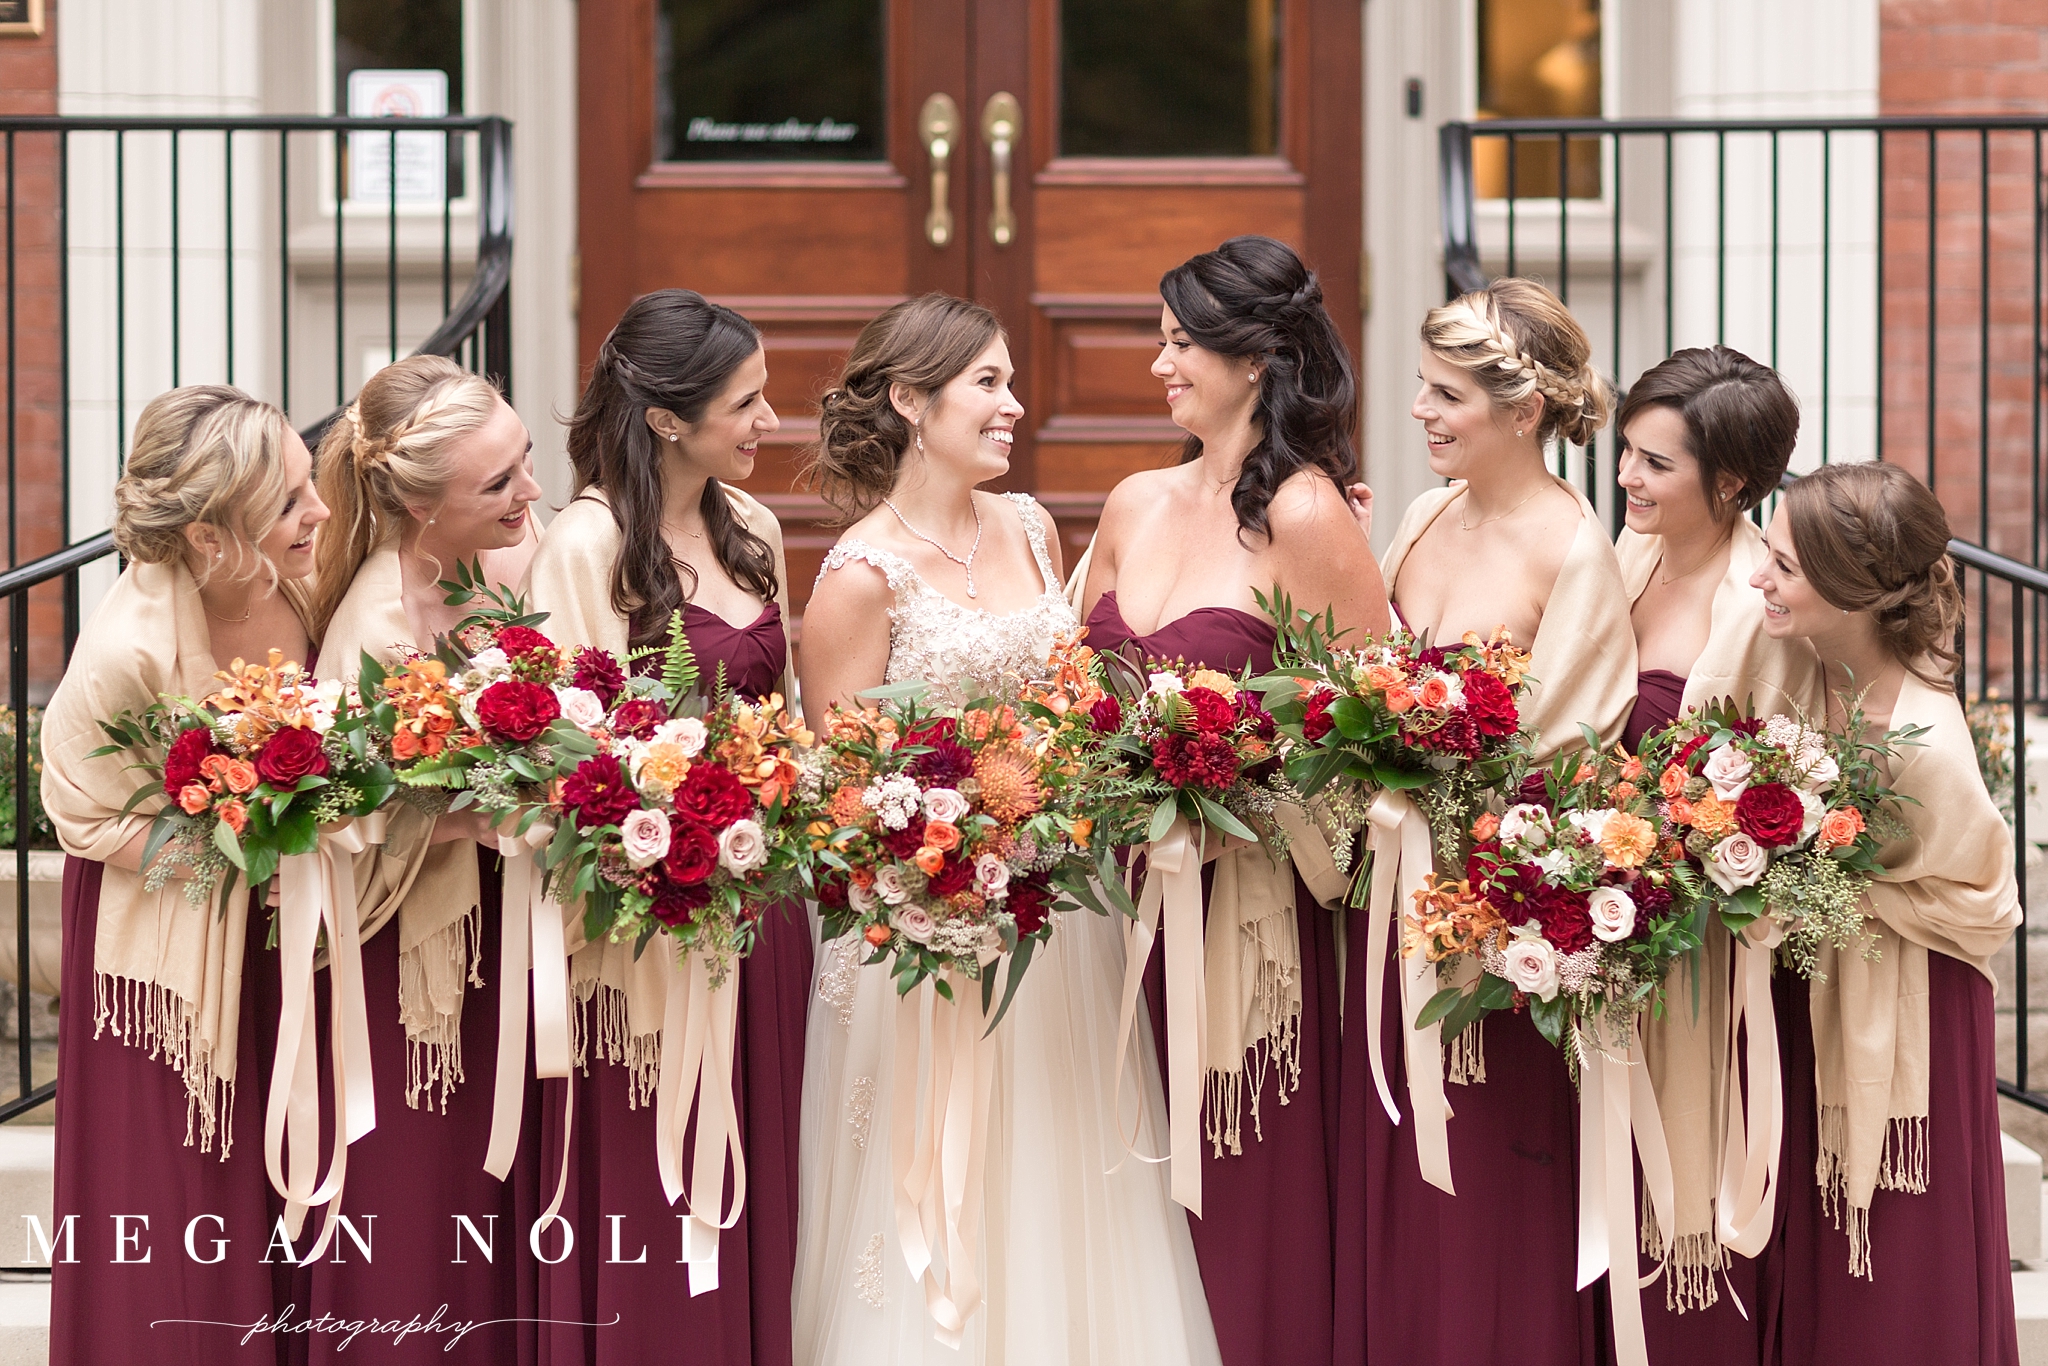 Tips To Be An Amazing Bridesmaid